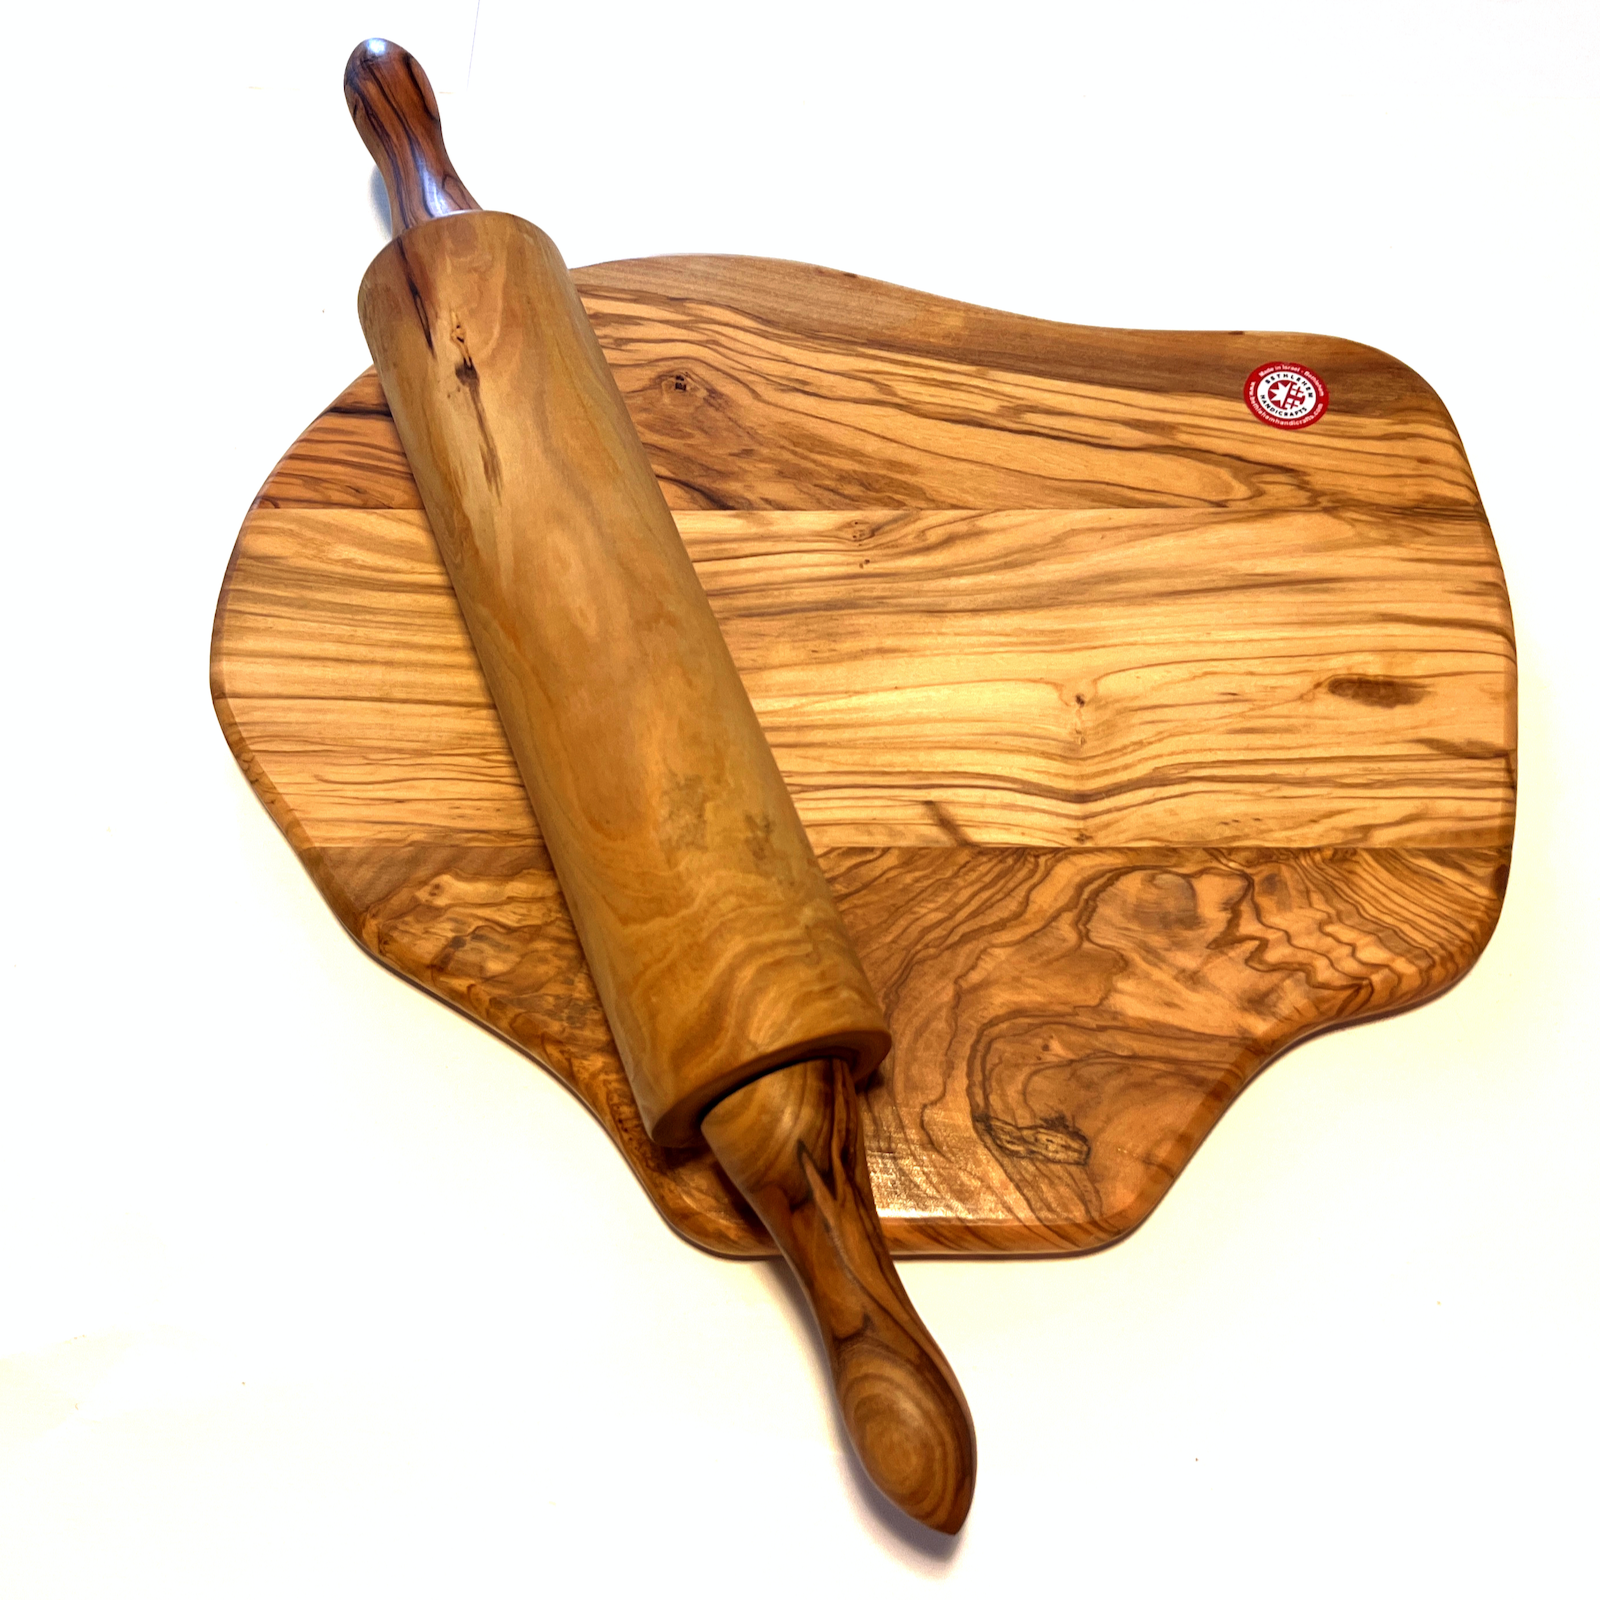 Olive Wood Cutting Board with Handle, Wooden Paddle Board, Charcuterie Board  12”